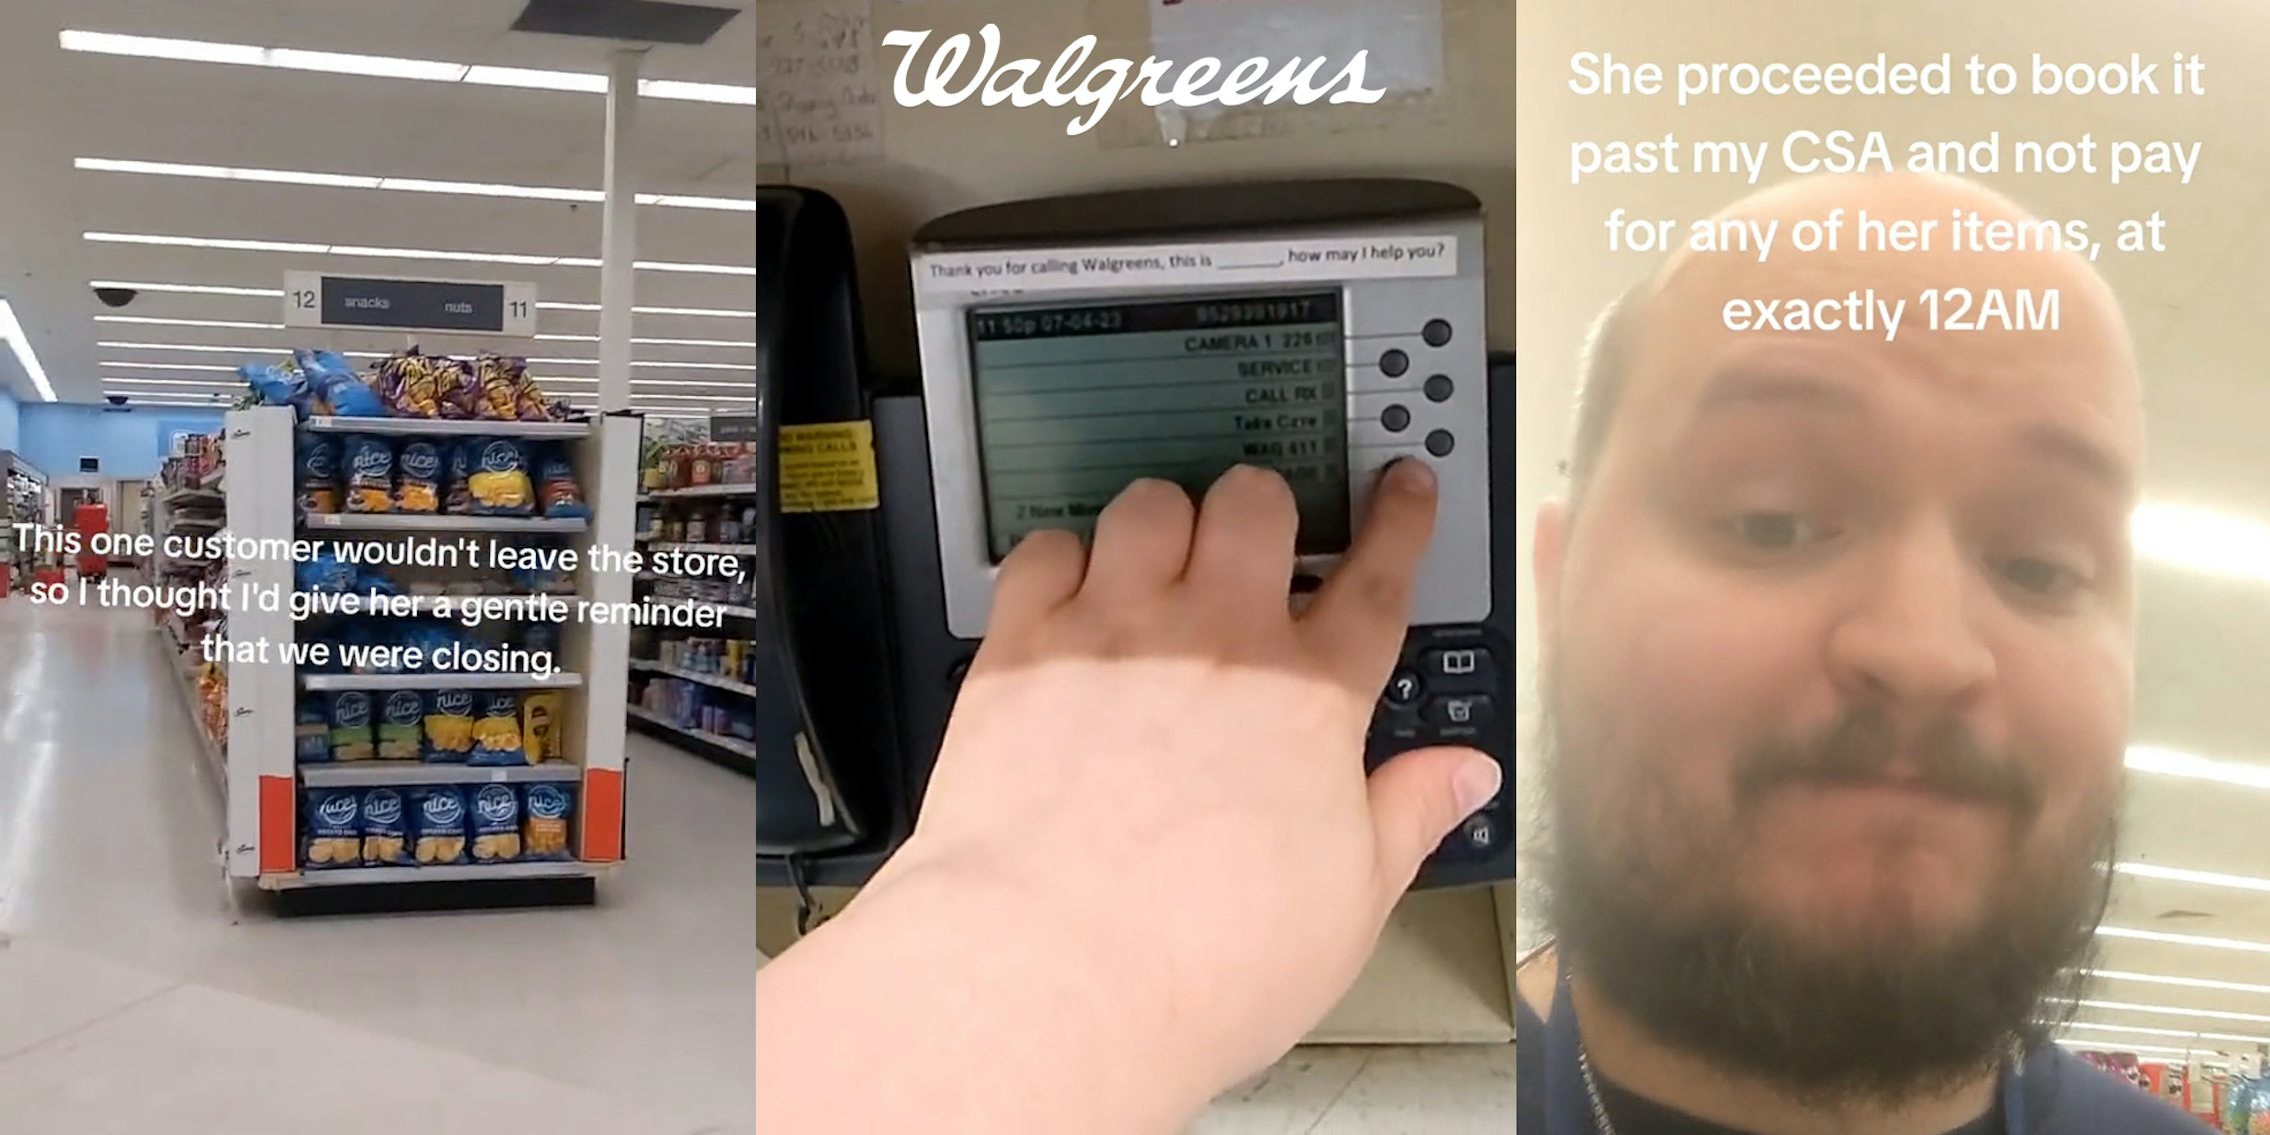 Walgreens interior with caption 'This one customer wouldn't leave the store, so I thought I'd give her a gentle reminder that we were closing' (l) Walgreens worker pressing button on phone with Walgreens logo above (c) Walgreens worker speaking with caption 'She proceeded to book it past my CSA and not pay for any of her items at exactly 12AM' (r)